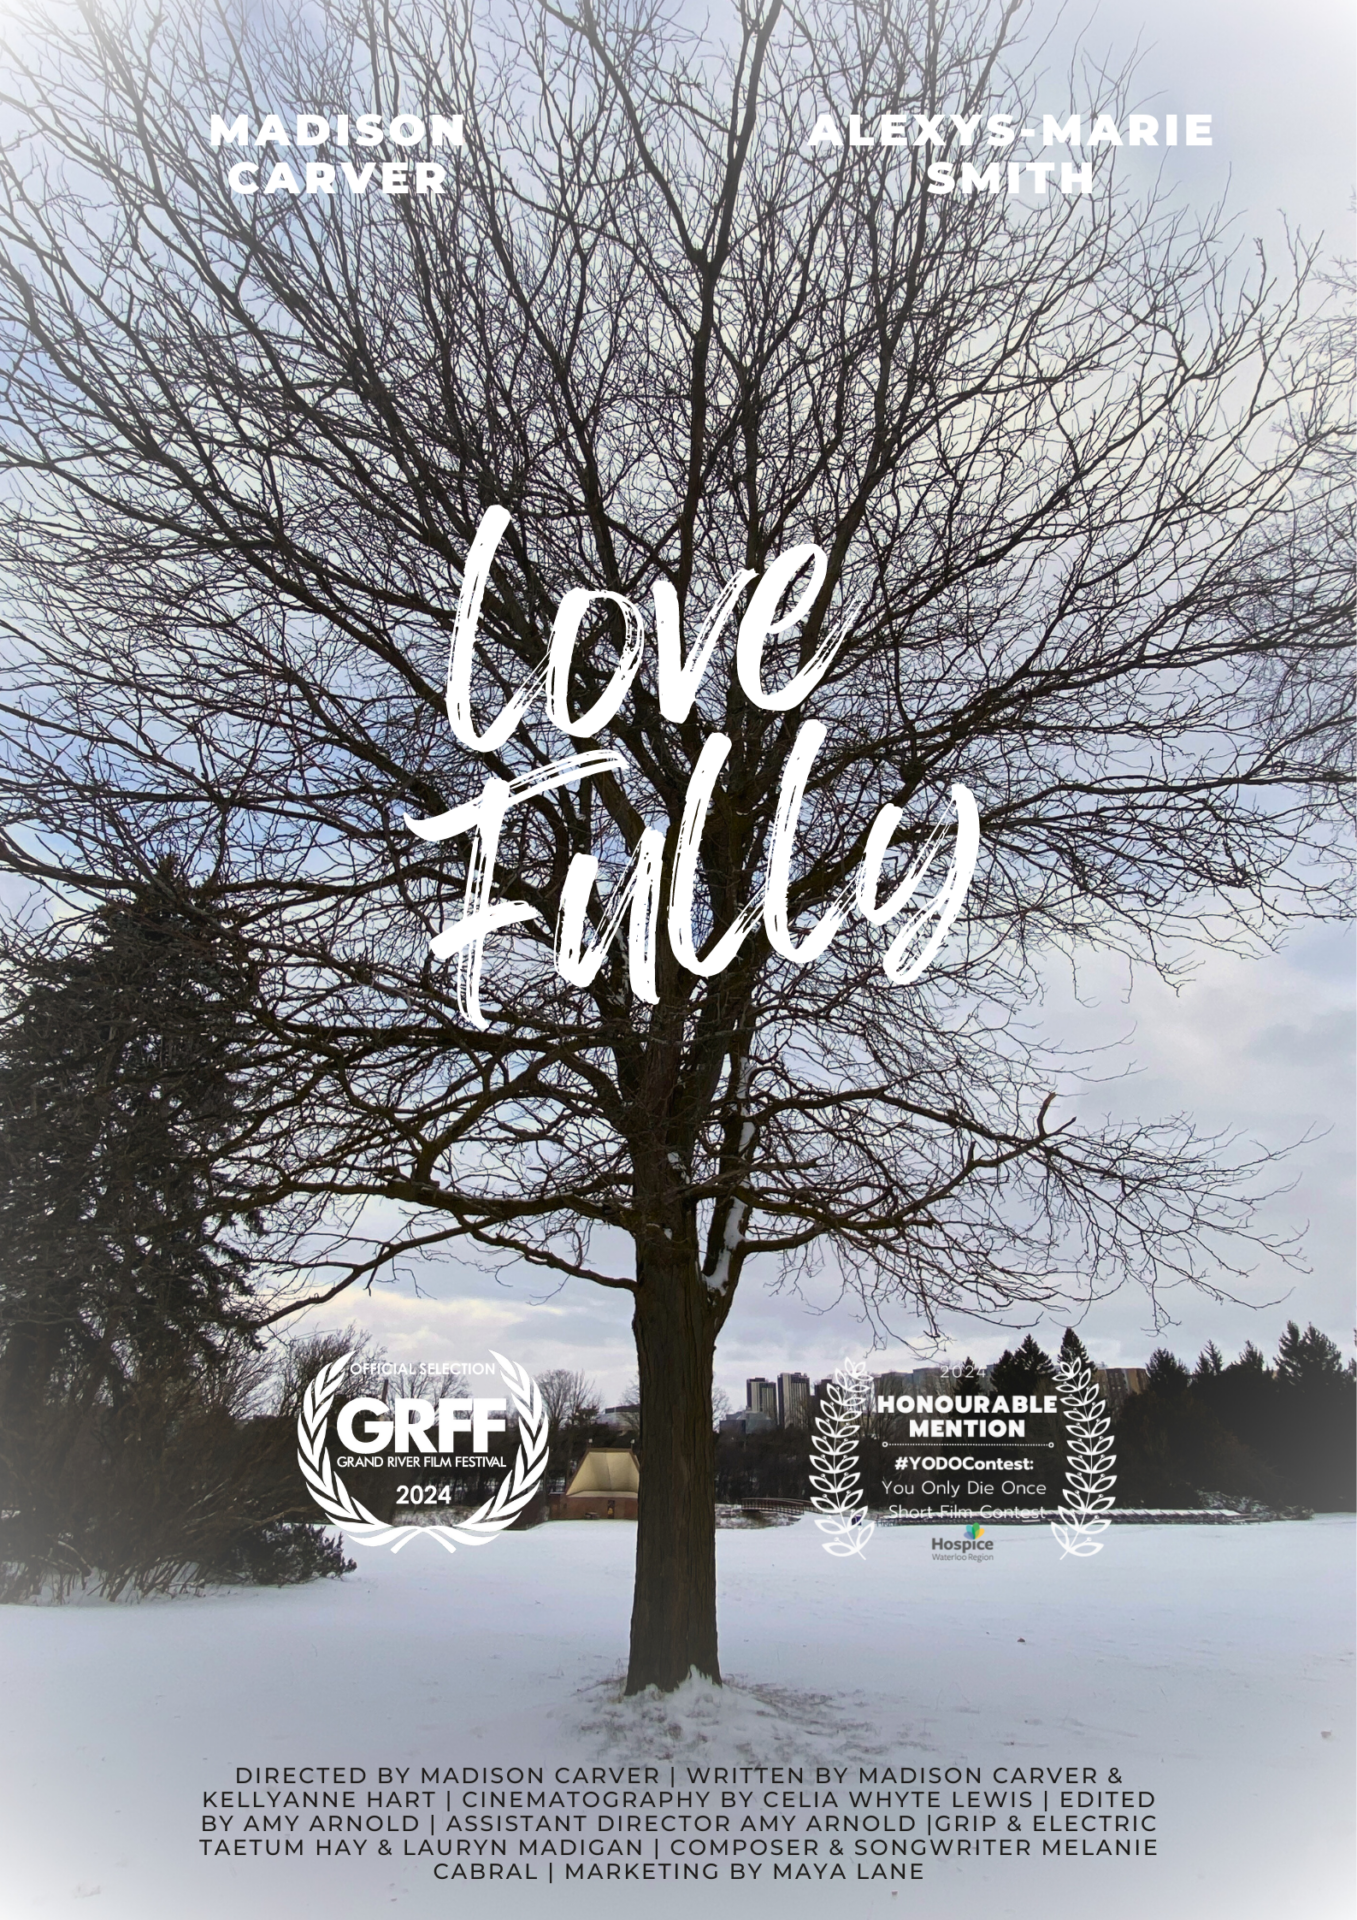 Poster for the movie Love Fully, which won Honourable Mention in the 2024 YODO Contest